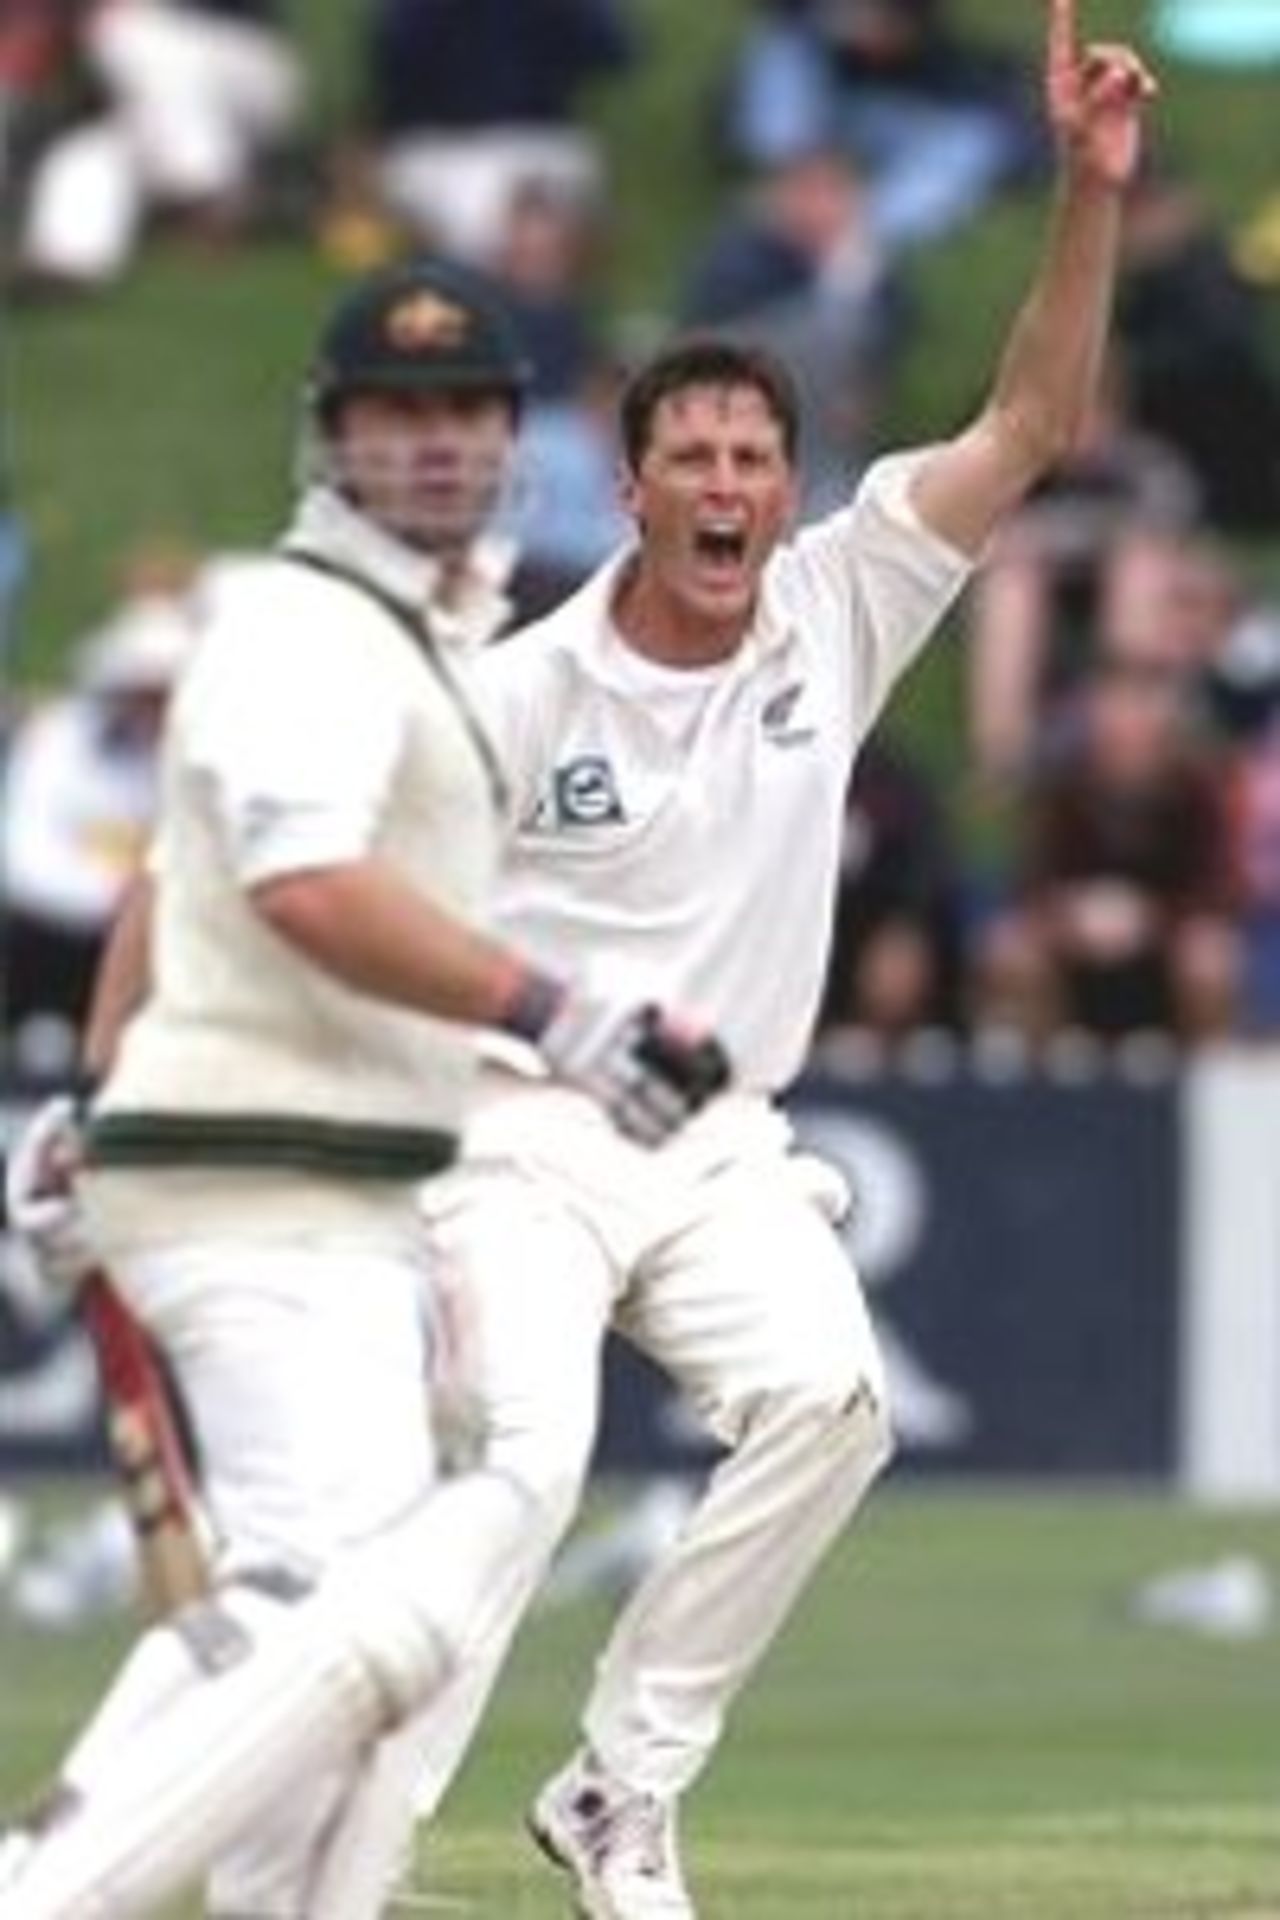 25 Mar 2000: Shayne O'Connor of New Zealand unsuccessfully appeals for LBW against Michael Slater of Australia, during day two of the second test between New Zealand and Australia at the Basin Reserve, Wellington, New Zealand.